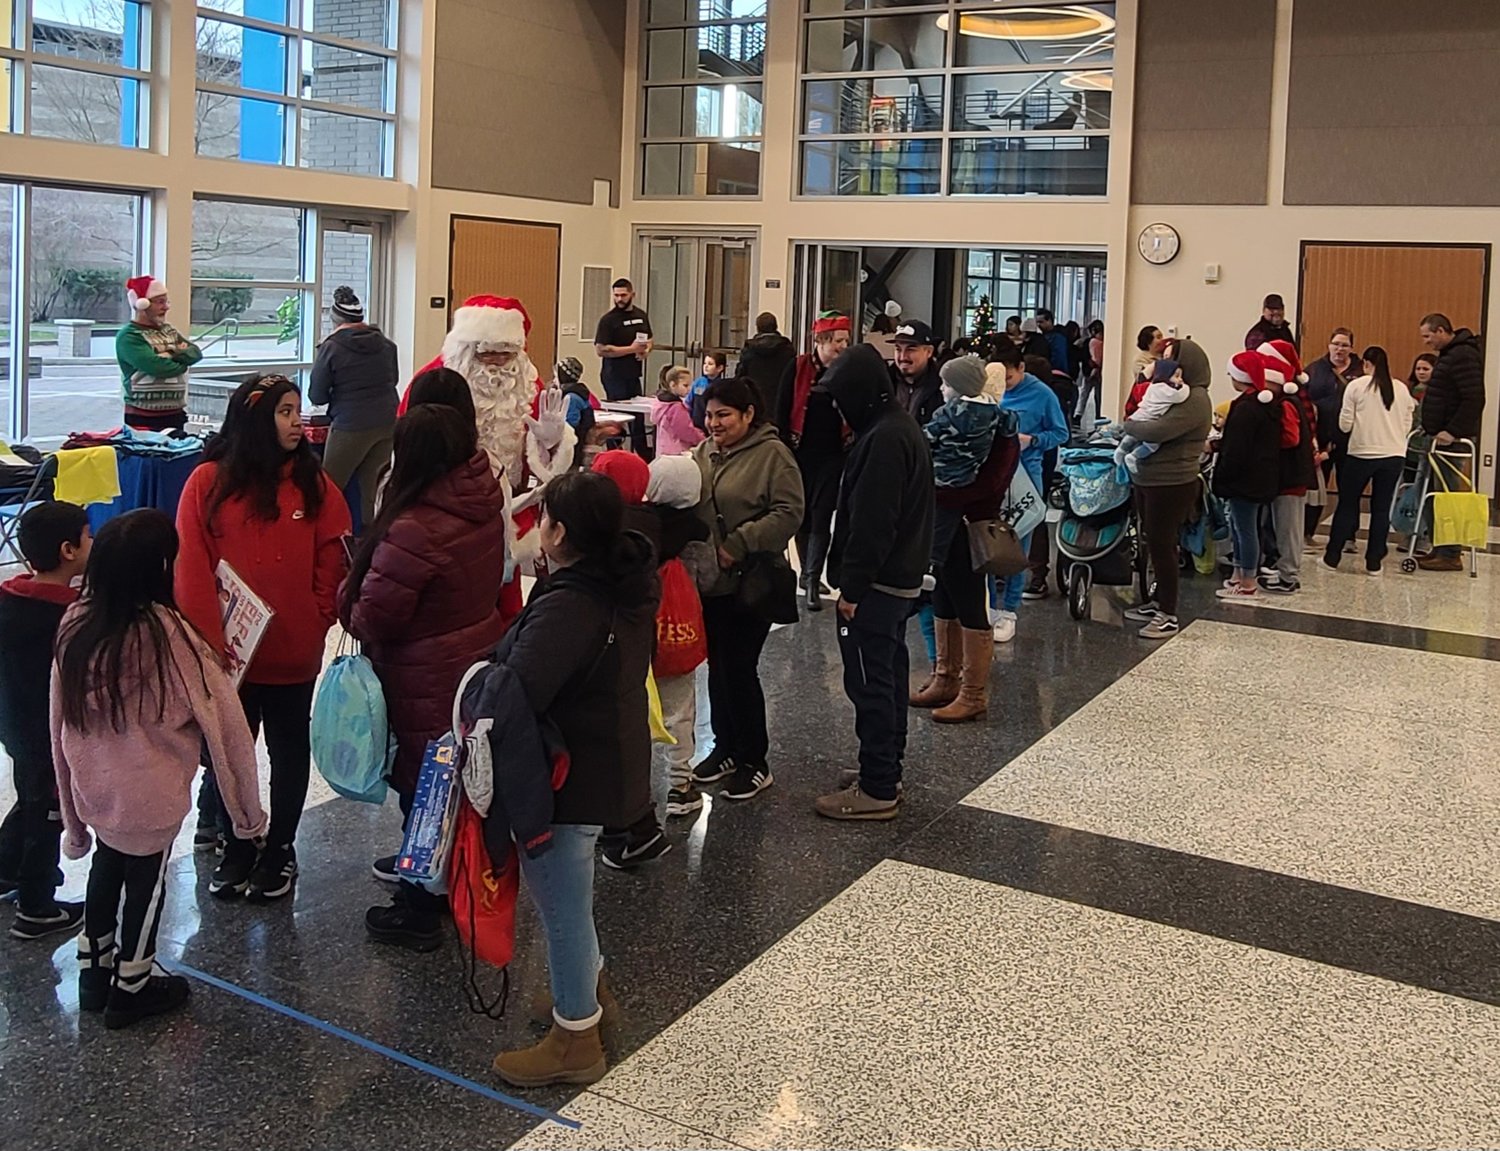 On Saturday at Centralia College, United Way of Lewis County hosted 270 kids for a gift giveaway, with each receiving a new toy and book from Santa Claus.  